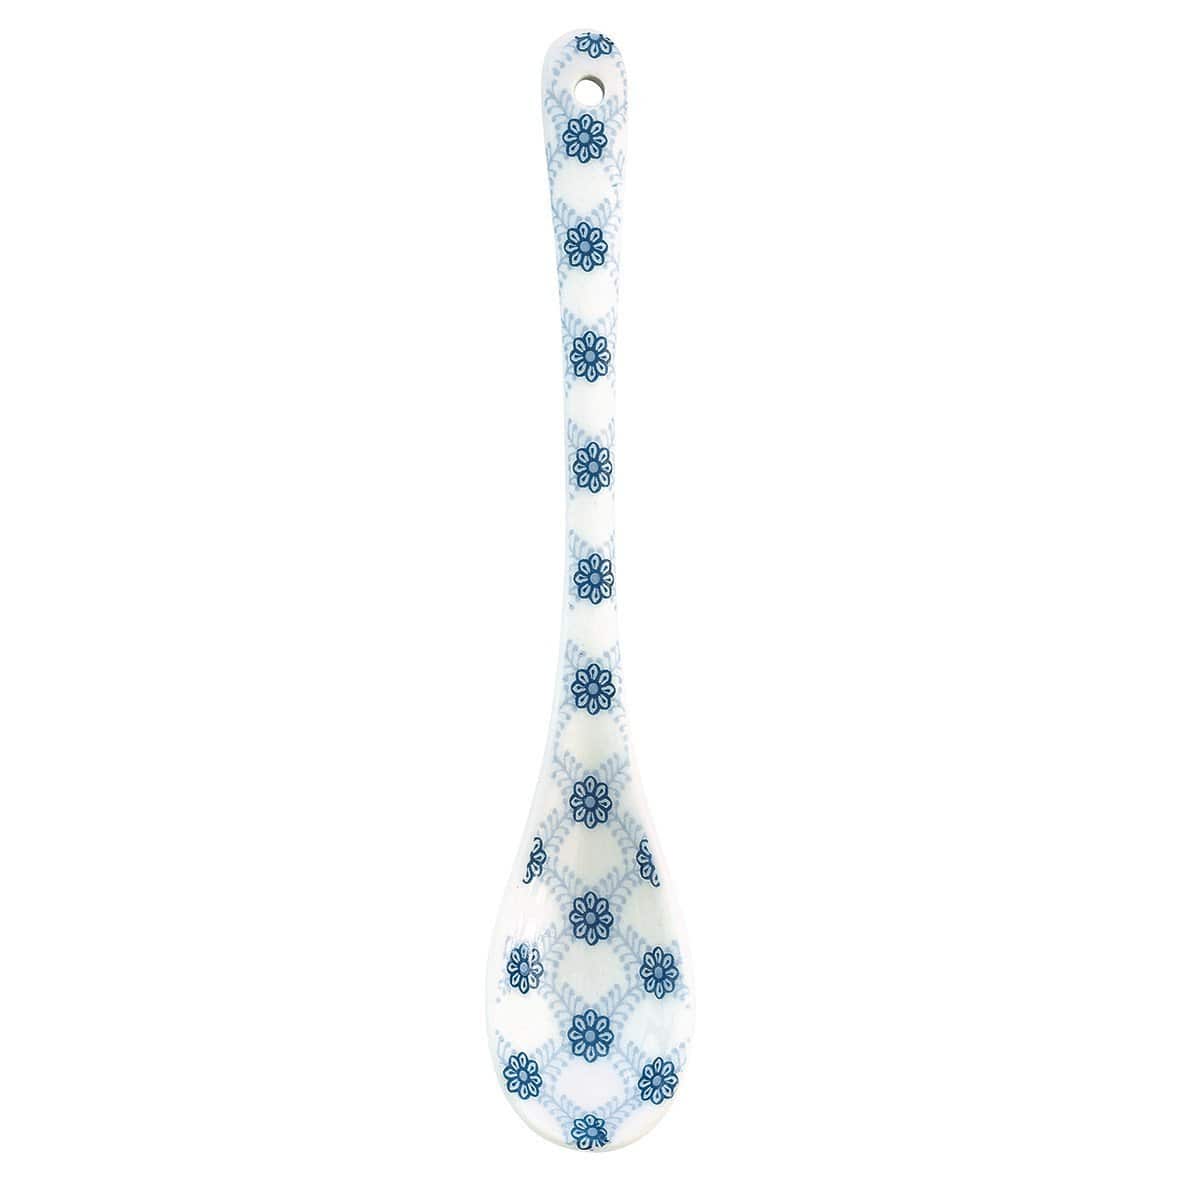 Stoneware Spoon - Lolly Blue House of Dudley